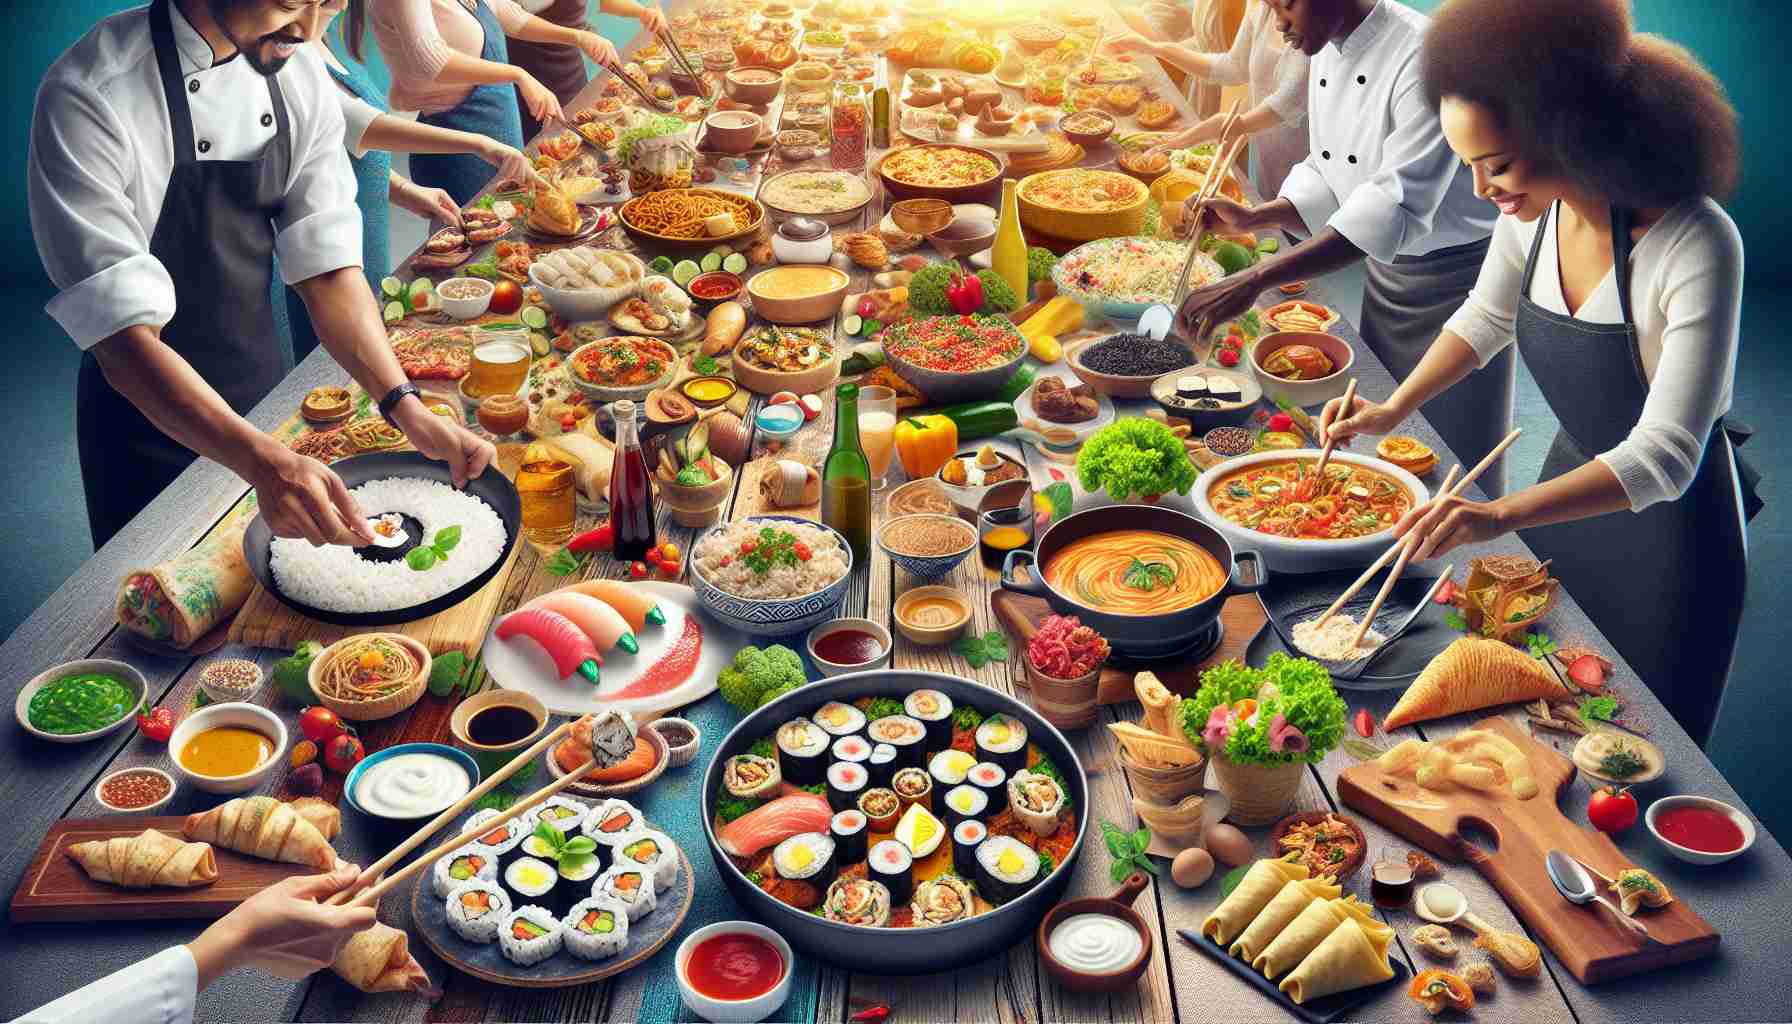 A high-definition image capturing a culinary adventure that crosses geographical boundaries. The picture should display a blend of food from various regions across the globe. It could include a South Asian woman meticulously rolling sushi while an African man stirs a pot of Italian pasta. There could be a table spread extensively with myriad dishes - from Mexican tacos to Middle Eastern falafel, from French crepes to Chinese dim sum, thus representing the culinary diversity and fusion. A balance of vibrant colors and appealing textures amongst all the dishes being prepared is anticipated to enhance the appeal.